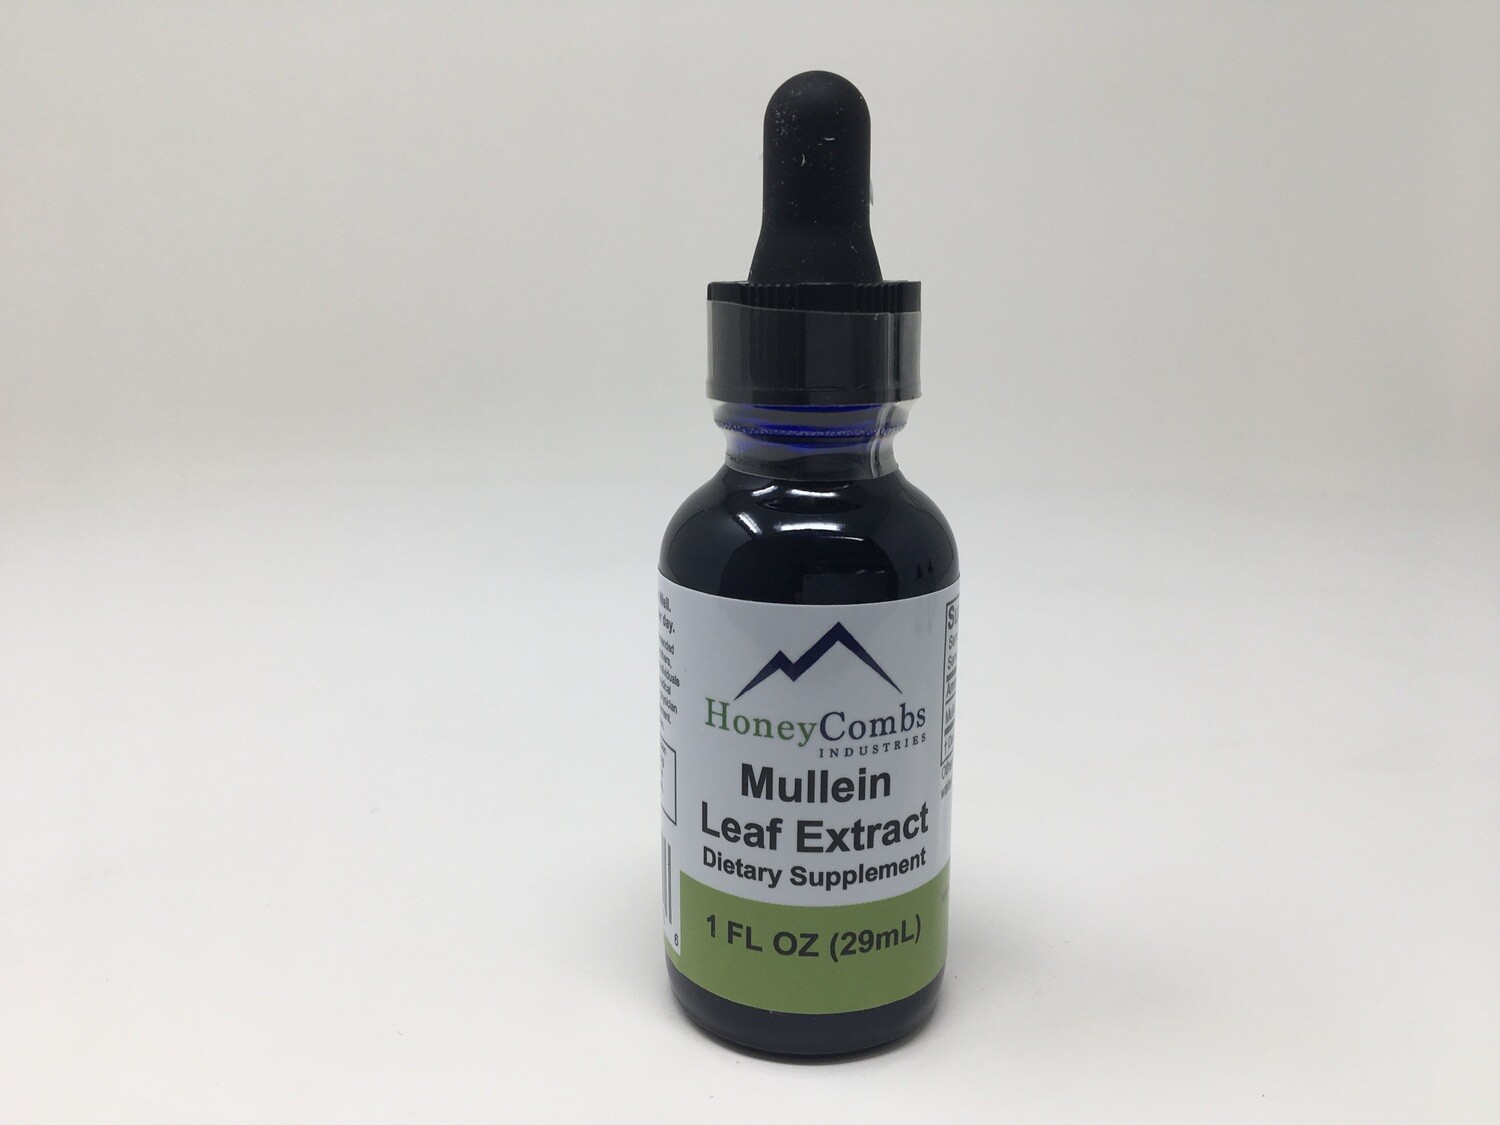 Mullein Leaf Extract 1oz (Honeycomb)